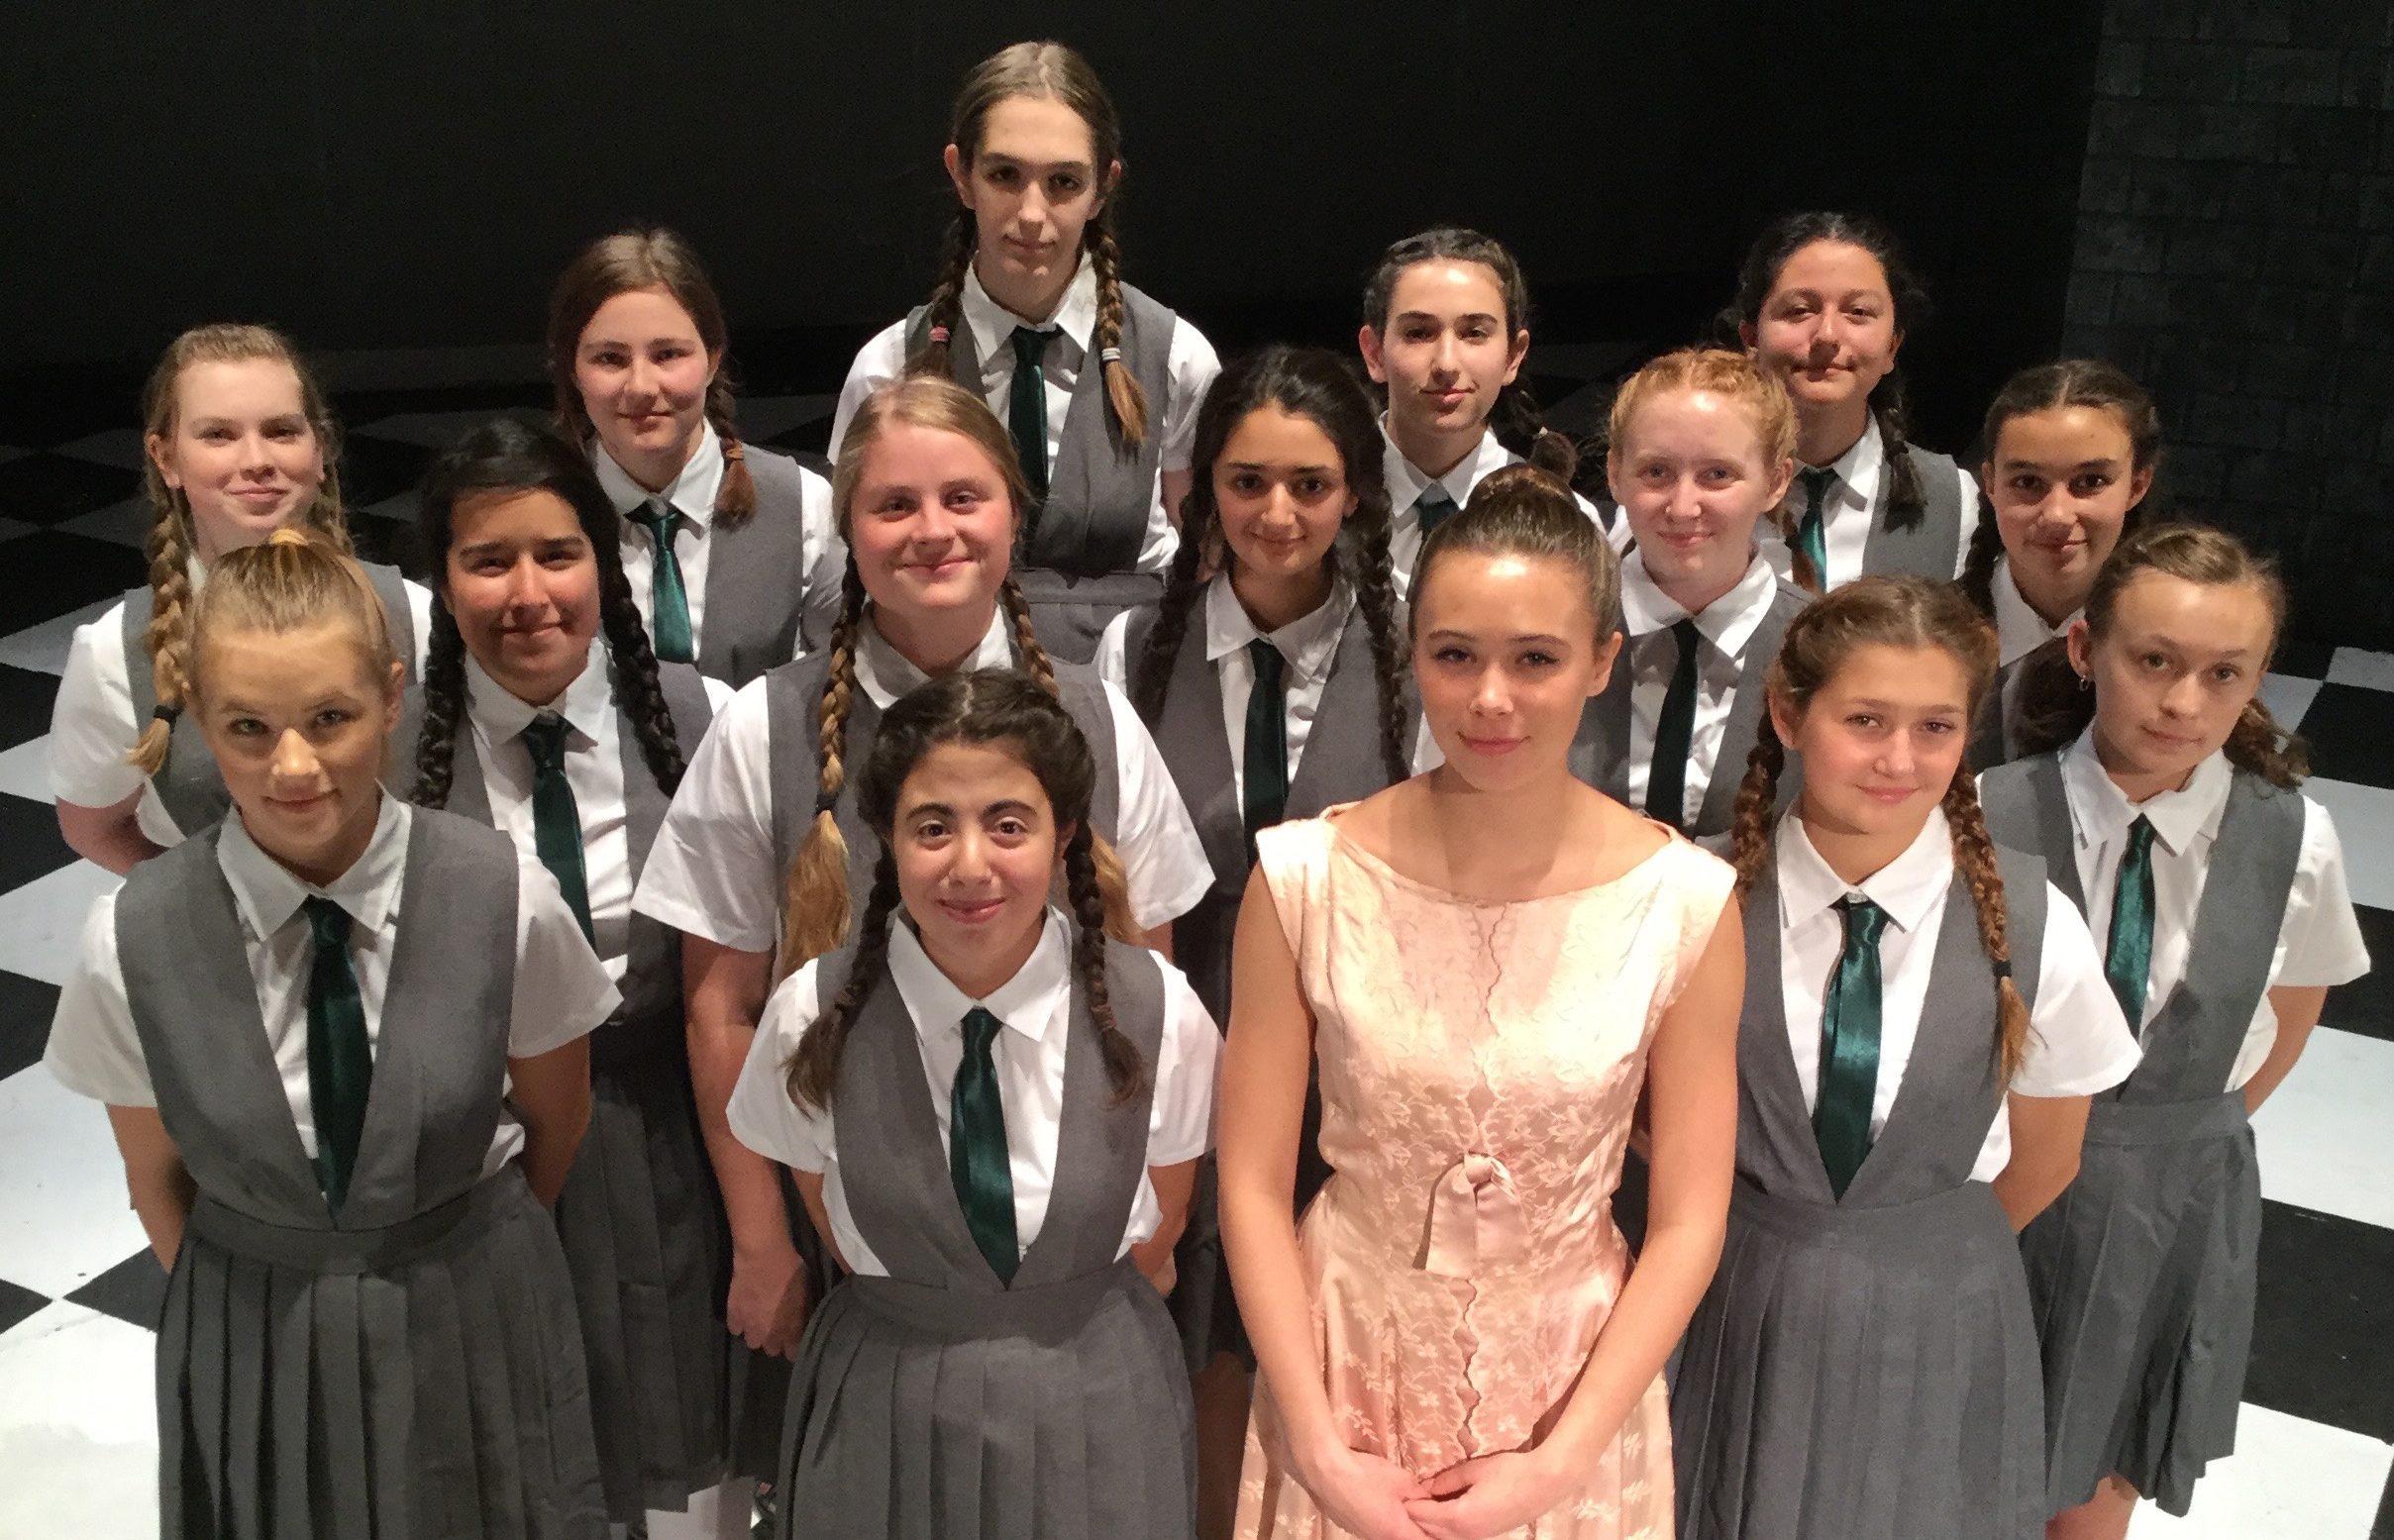 High school troupe to perform ‘The Prime of Miss Jean Brodie’